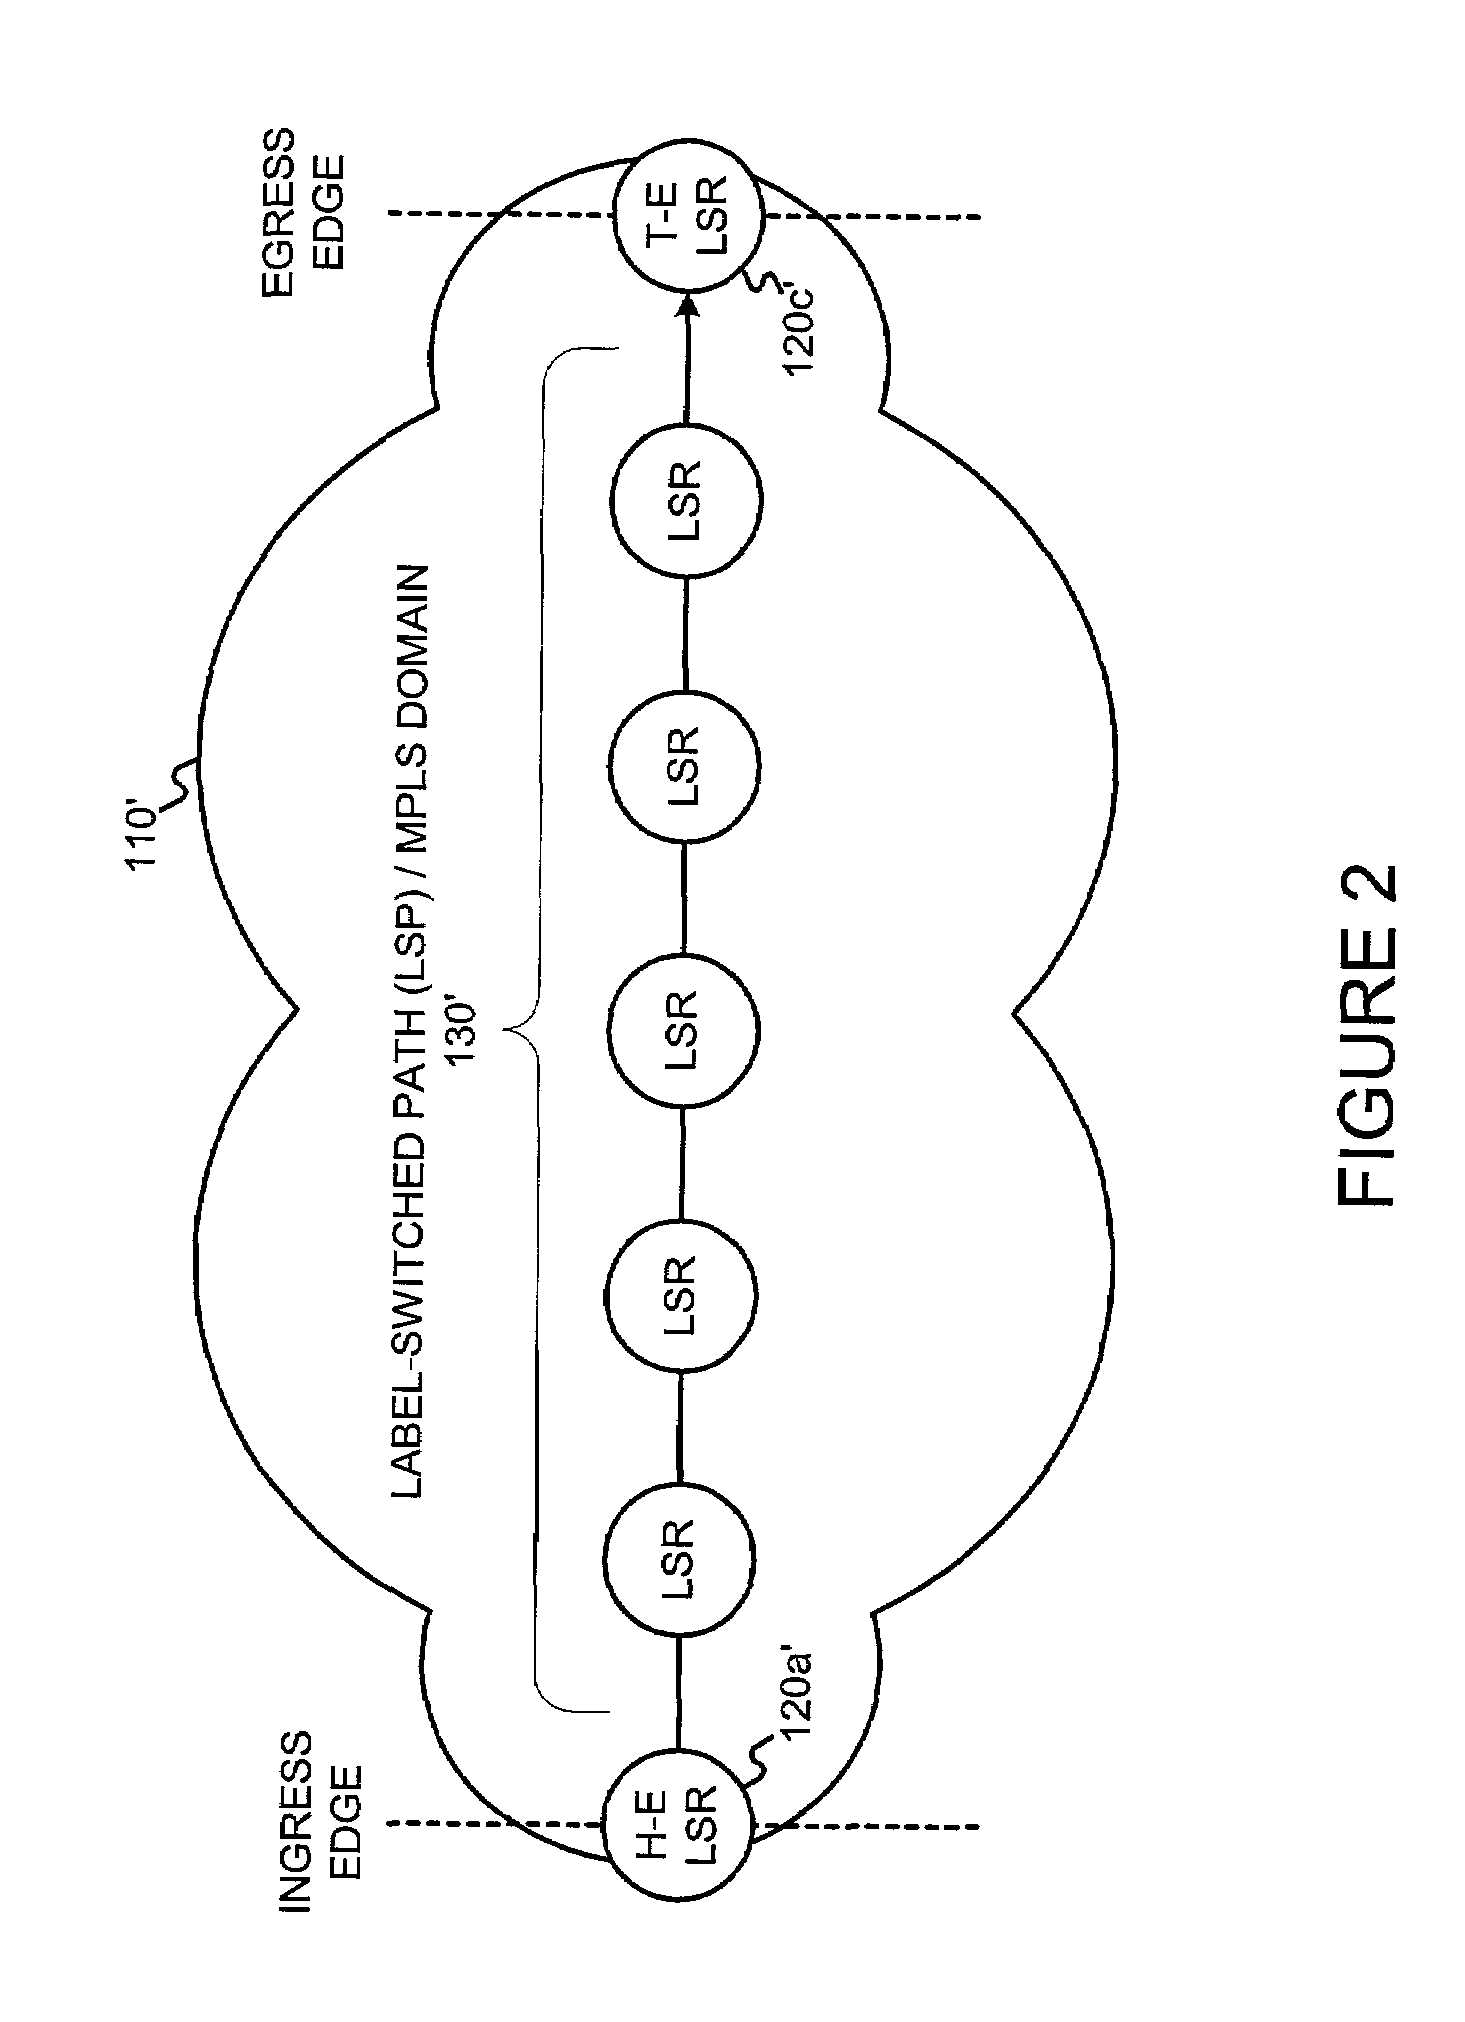 Edge devices for providing a transparent LAN segment service and configuring such edge devices